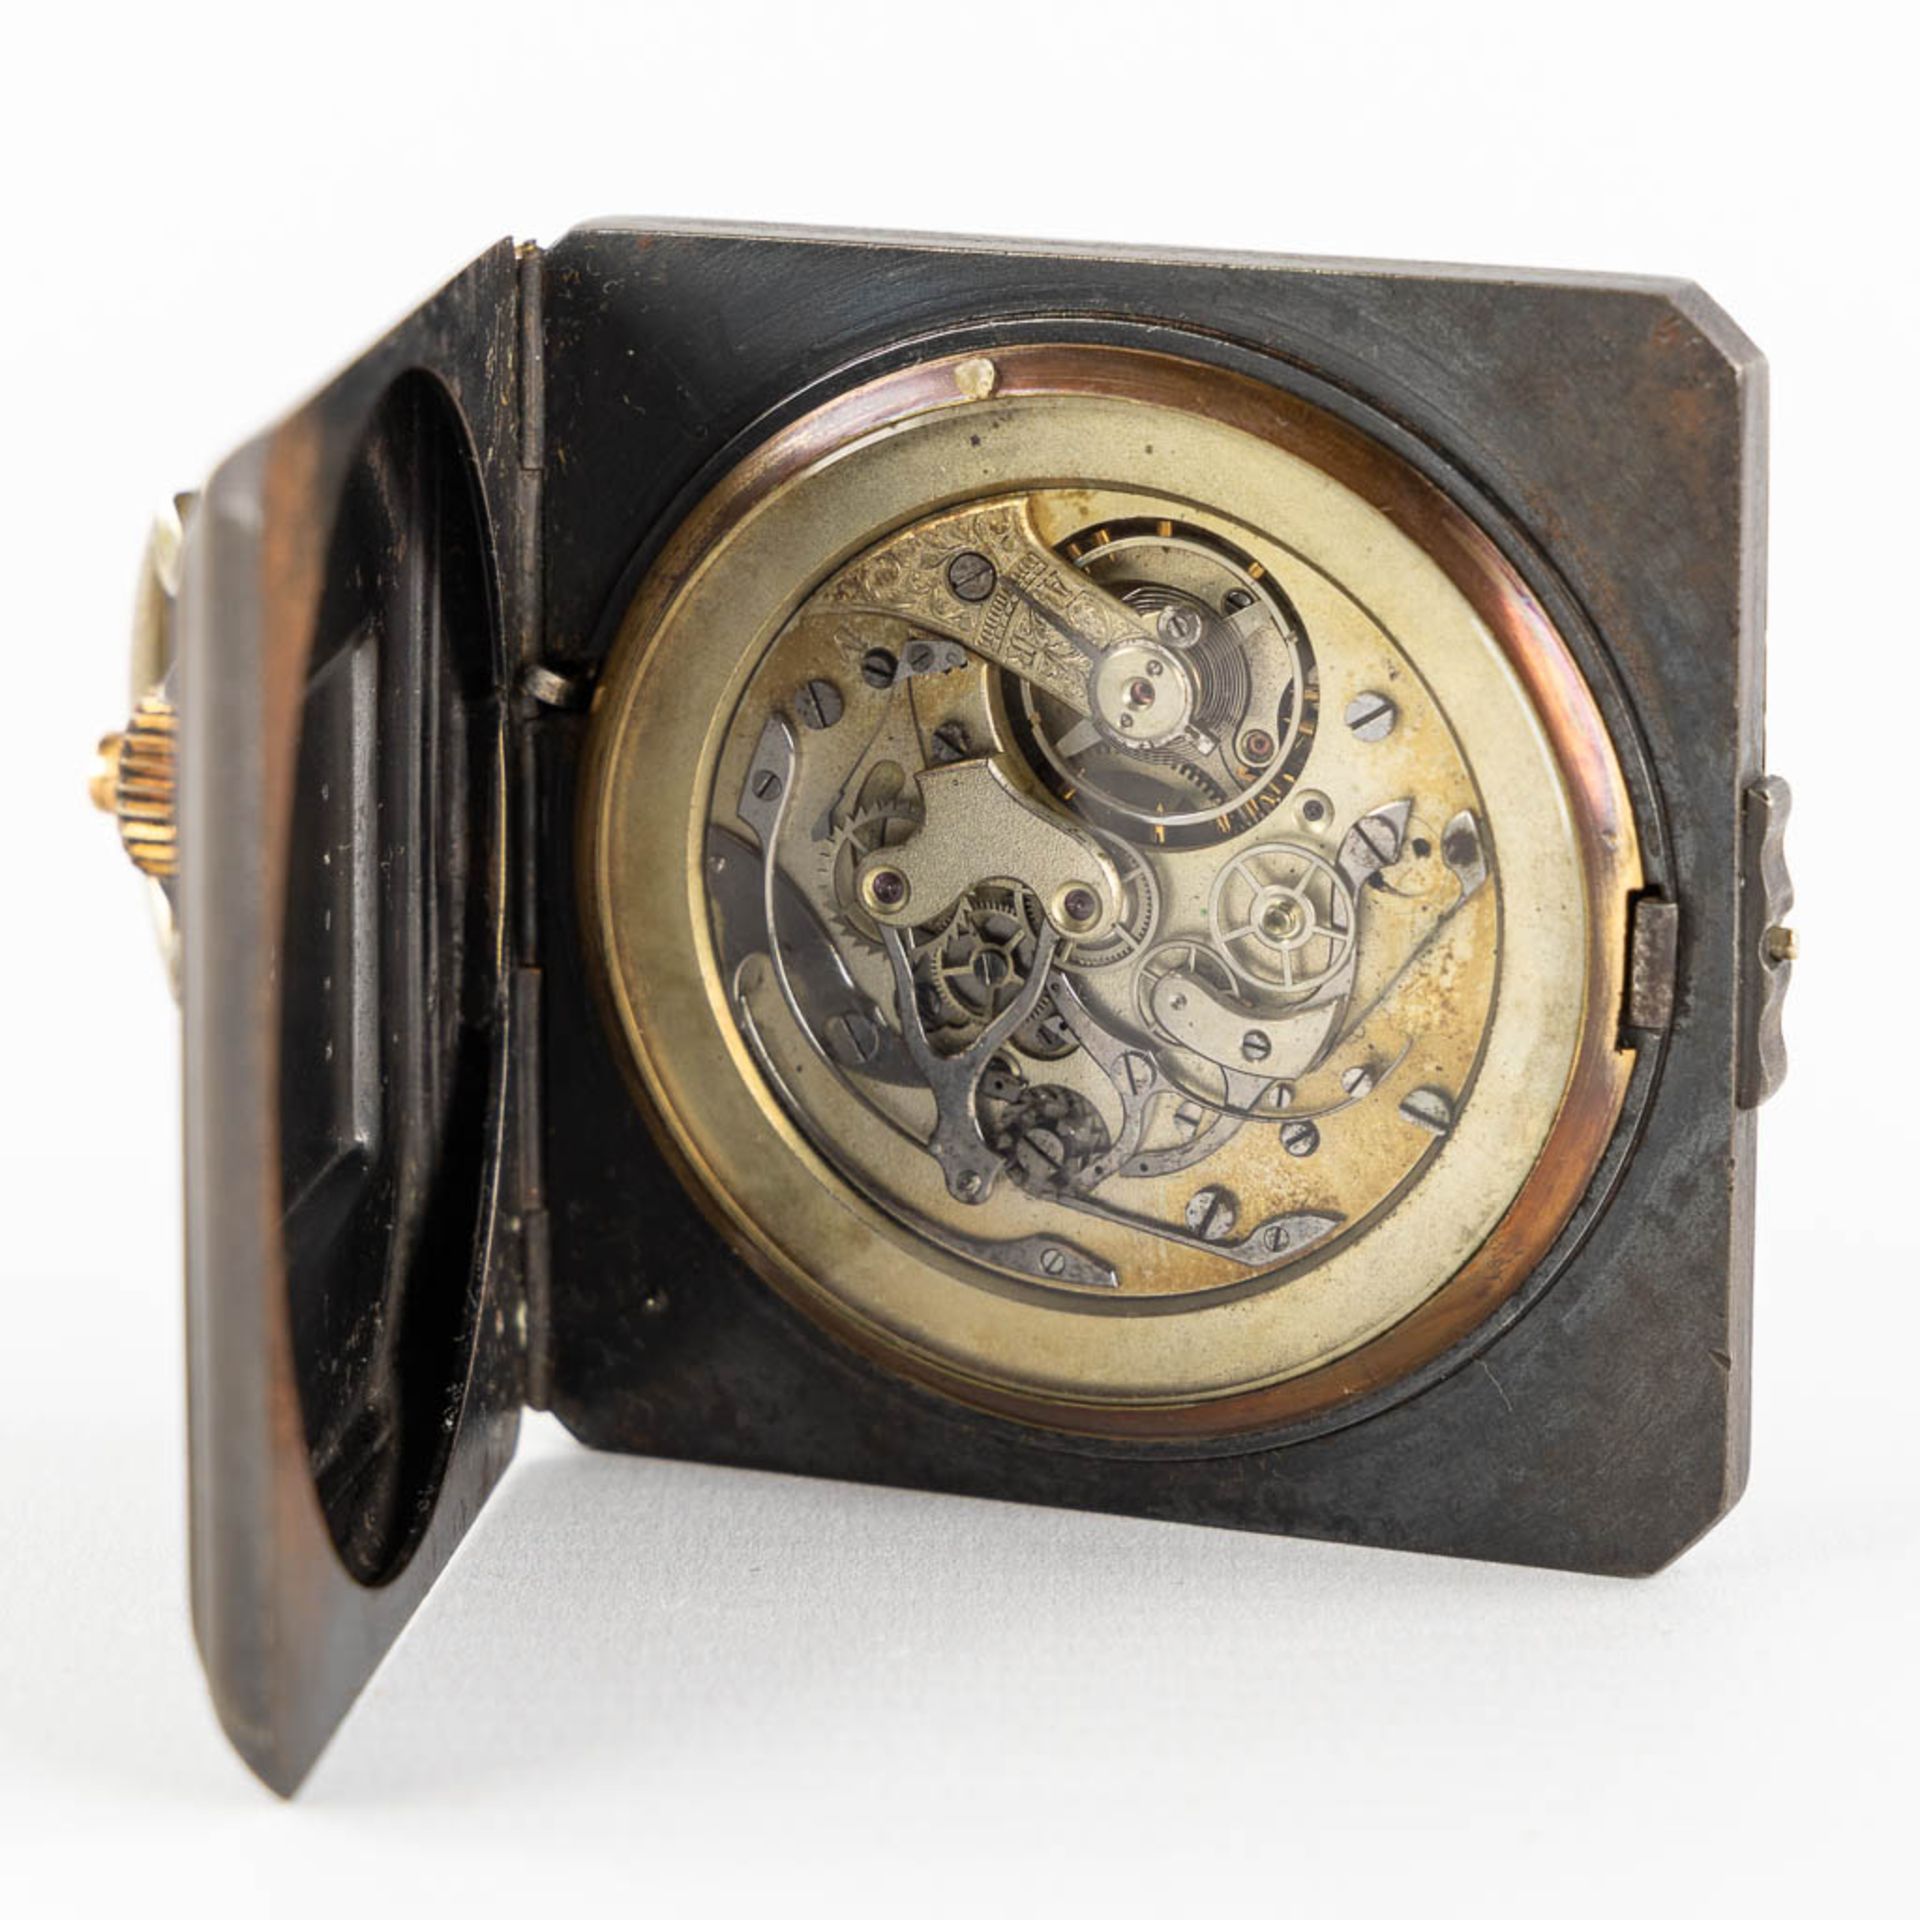 An antique 'Chronograph' pocket watch, first half of the 20th C. (W:6,4 x H:10 cm) - Image 10 of 11